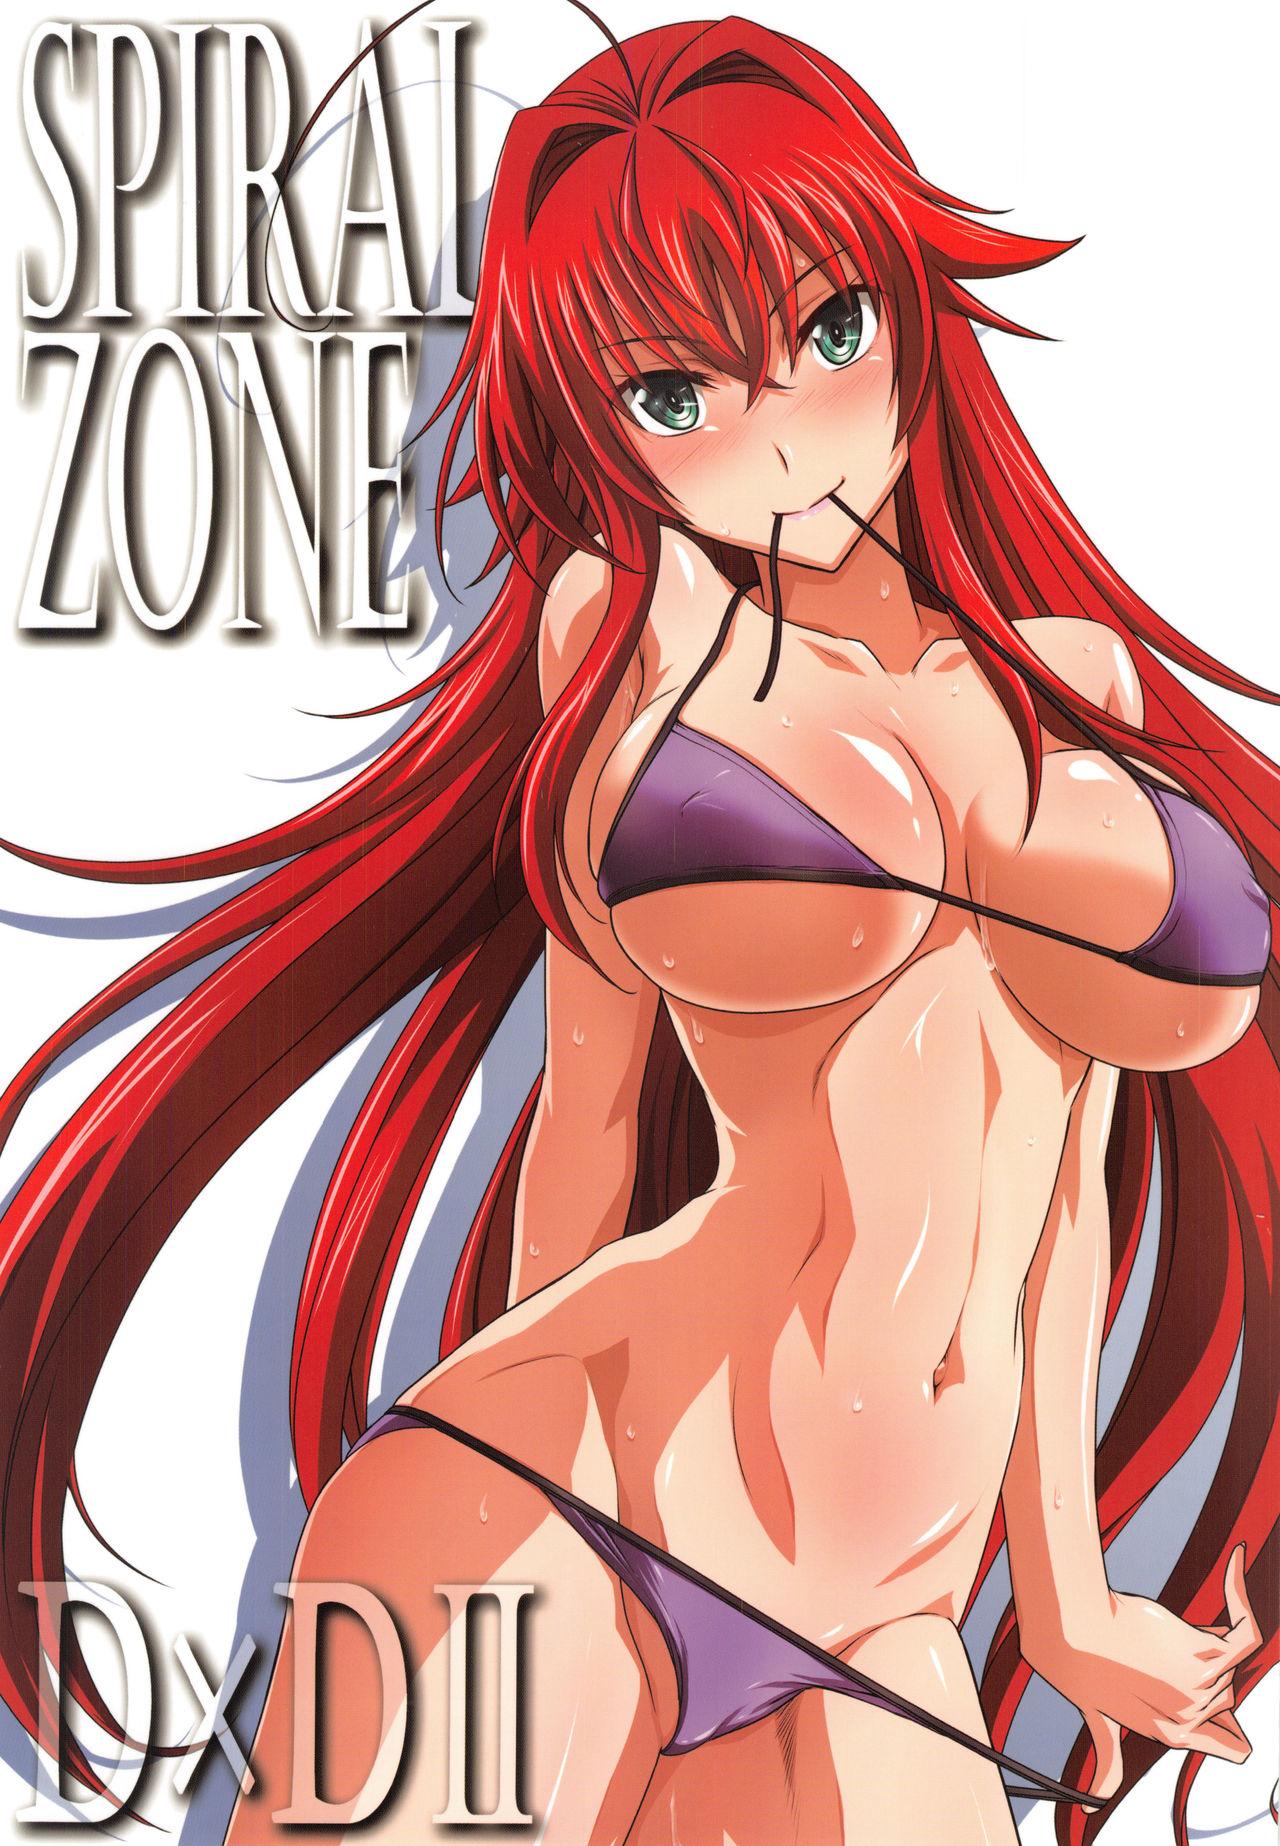 Grosso SPIRAL ZONE DxD II - Highschool dxd Boquete - Picture 1